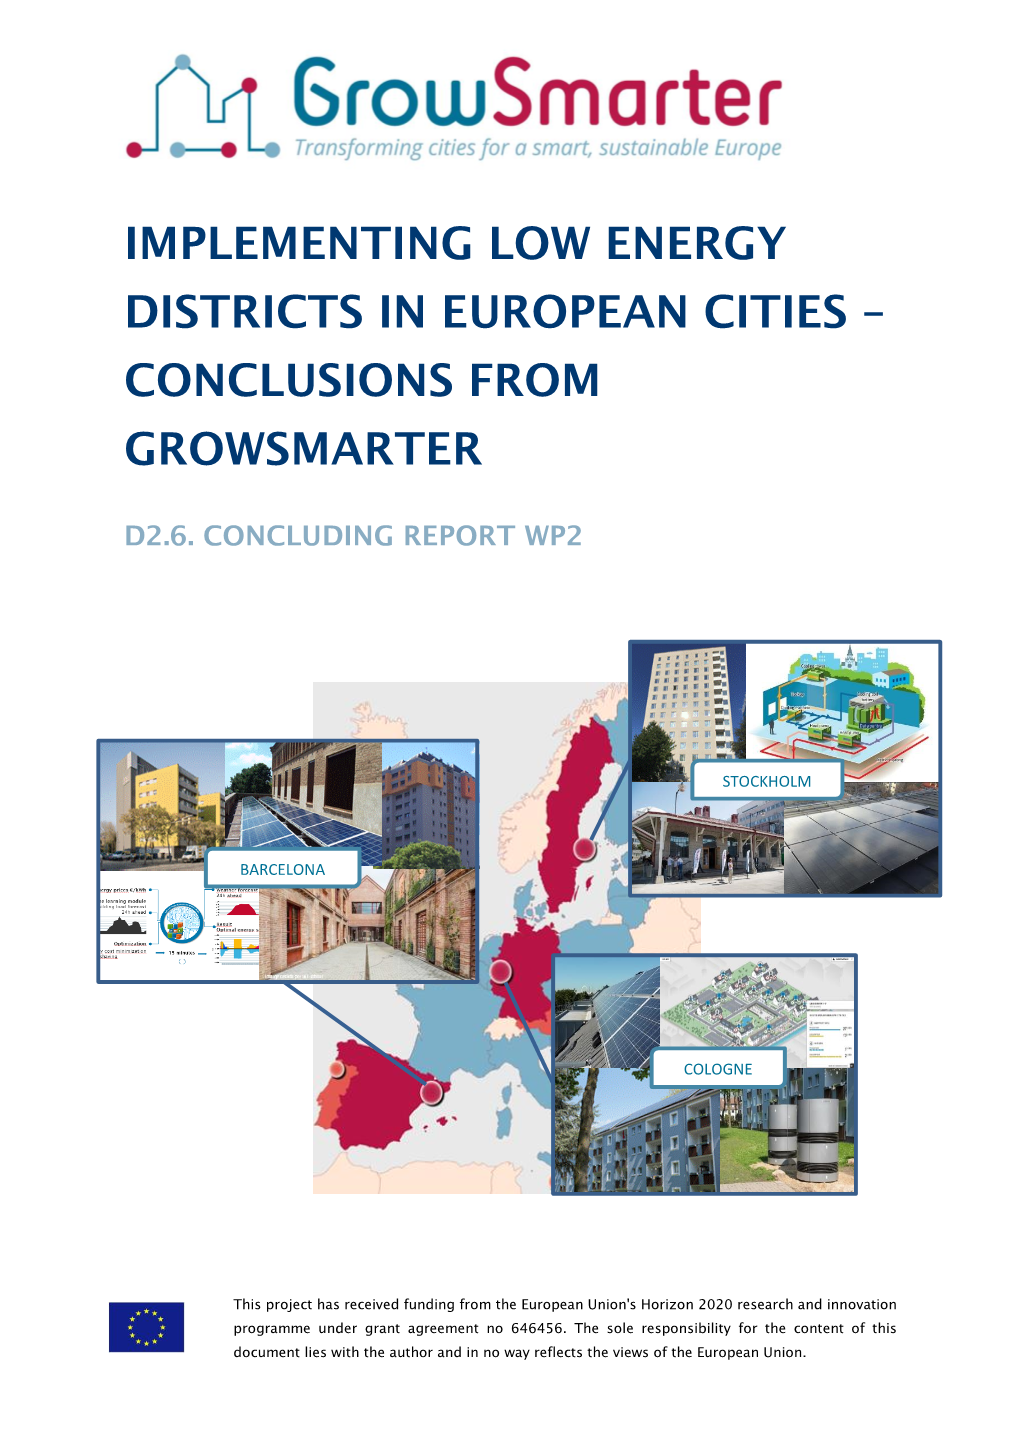 Concluding Report on Low Energy Districts